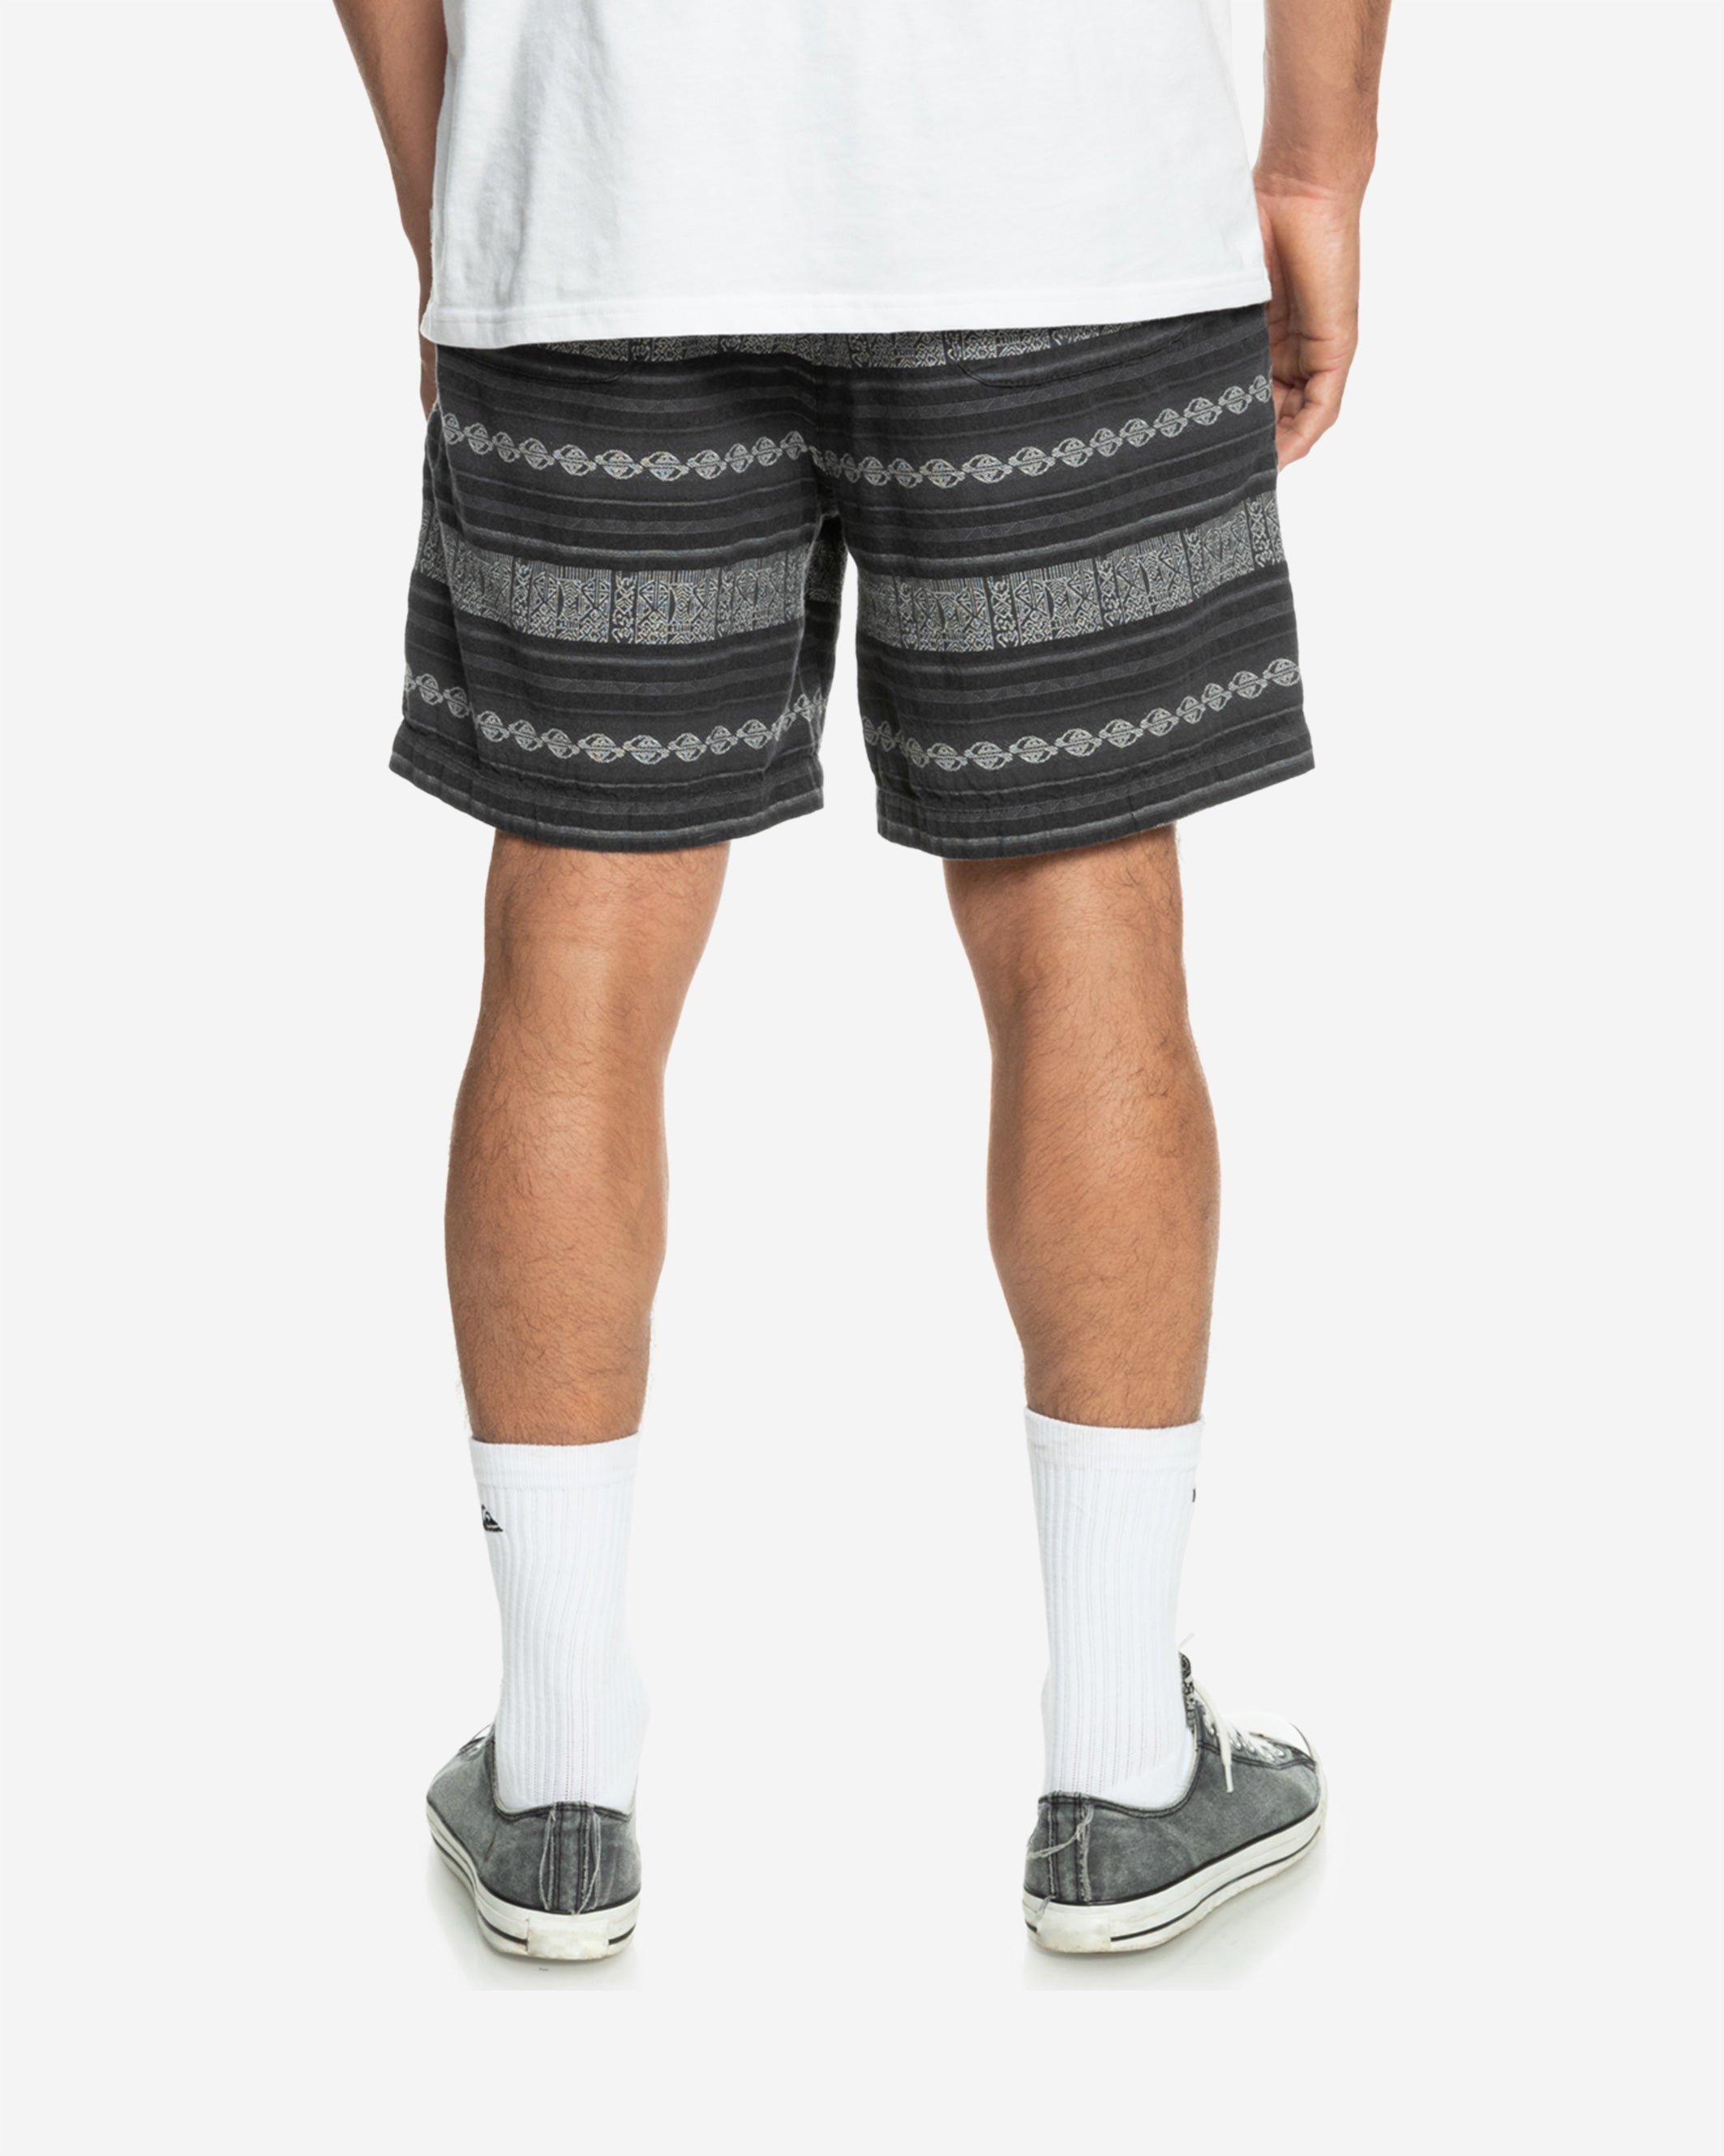 Jacquard brings a fresh point of view to our famous Taxer shorts. Still chill, but now slightly elevated for those times when you want to make a better impression. A relaxed fit and a drawcord closure tie the modern surf vibe altogether.